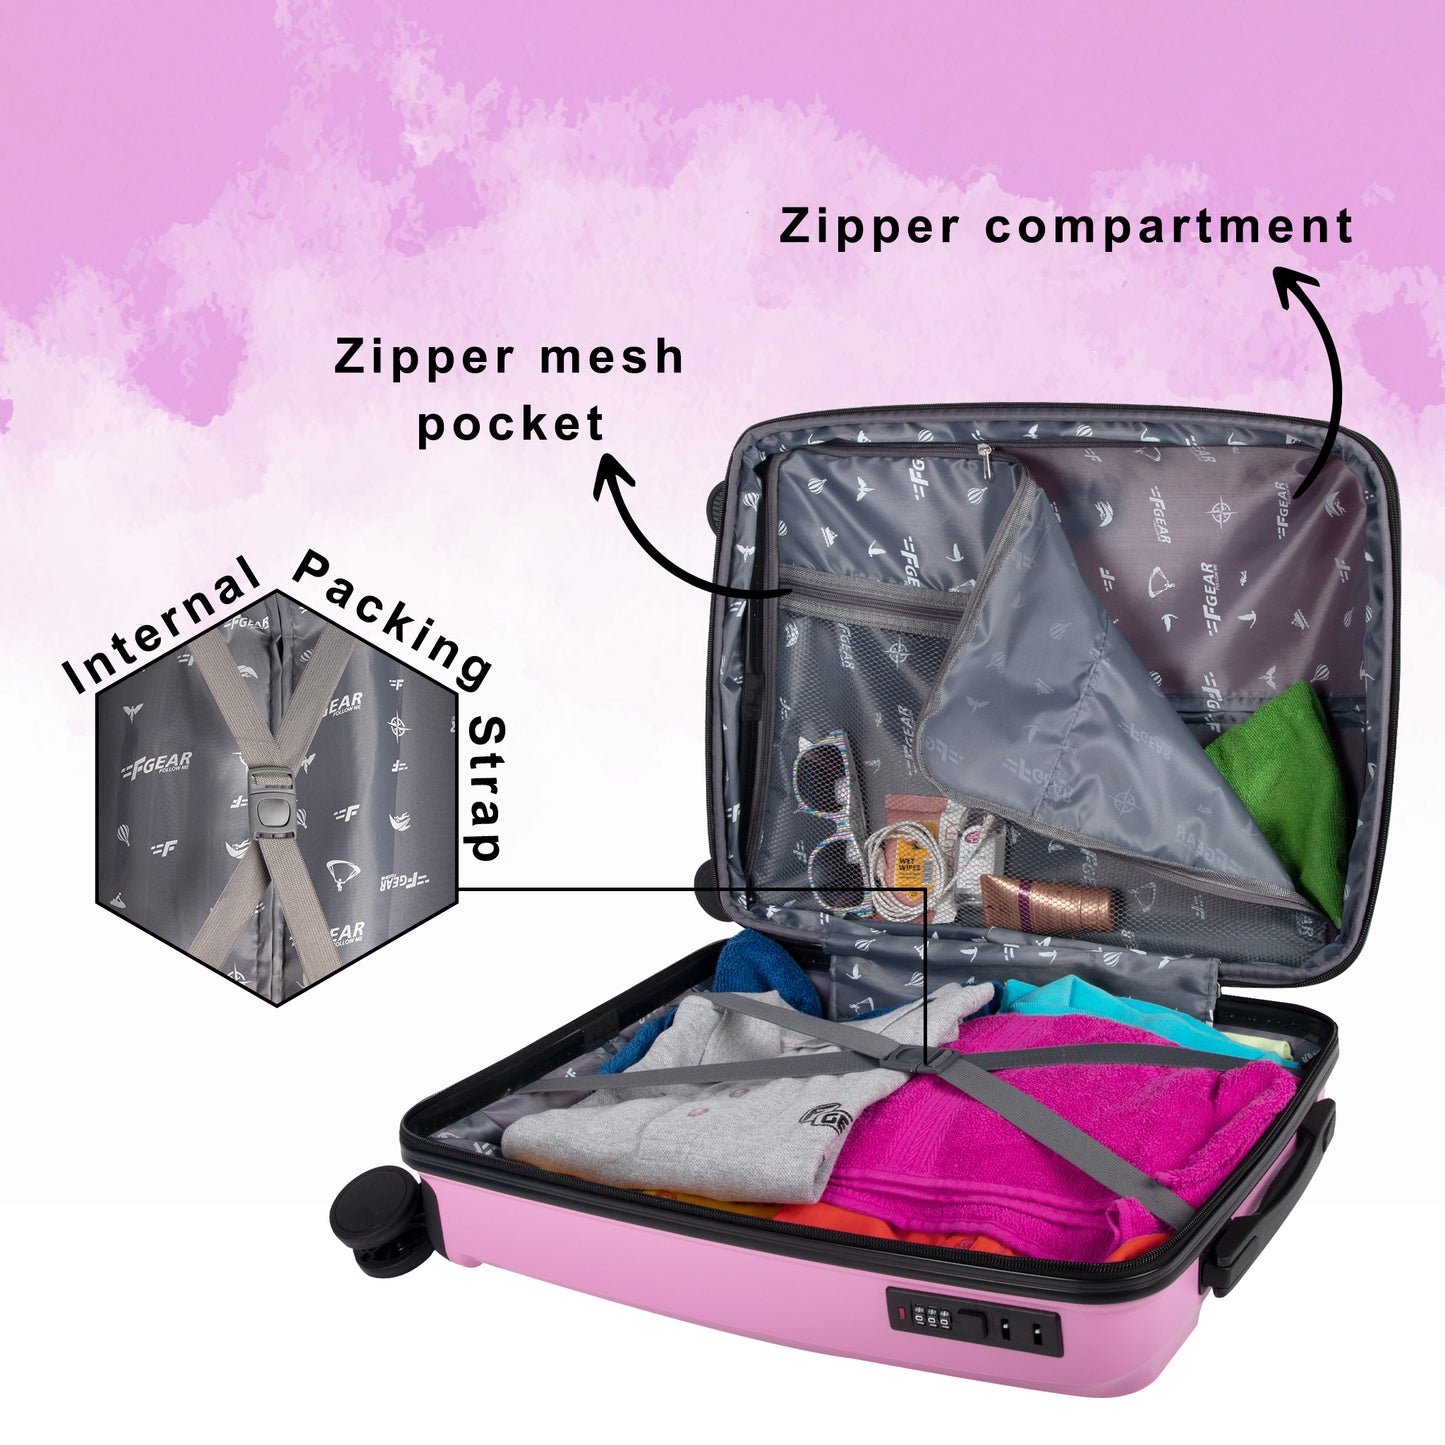 STV PP03 20" Pink Expandable Cabin (Small) Suitcase